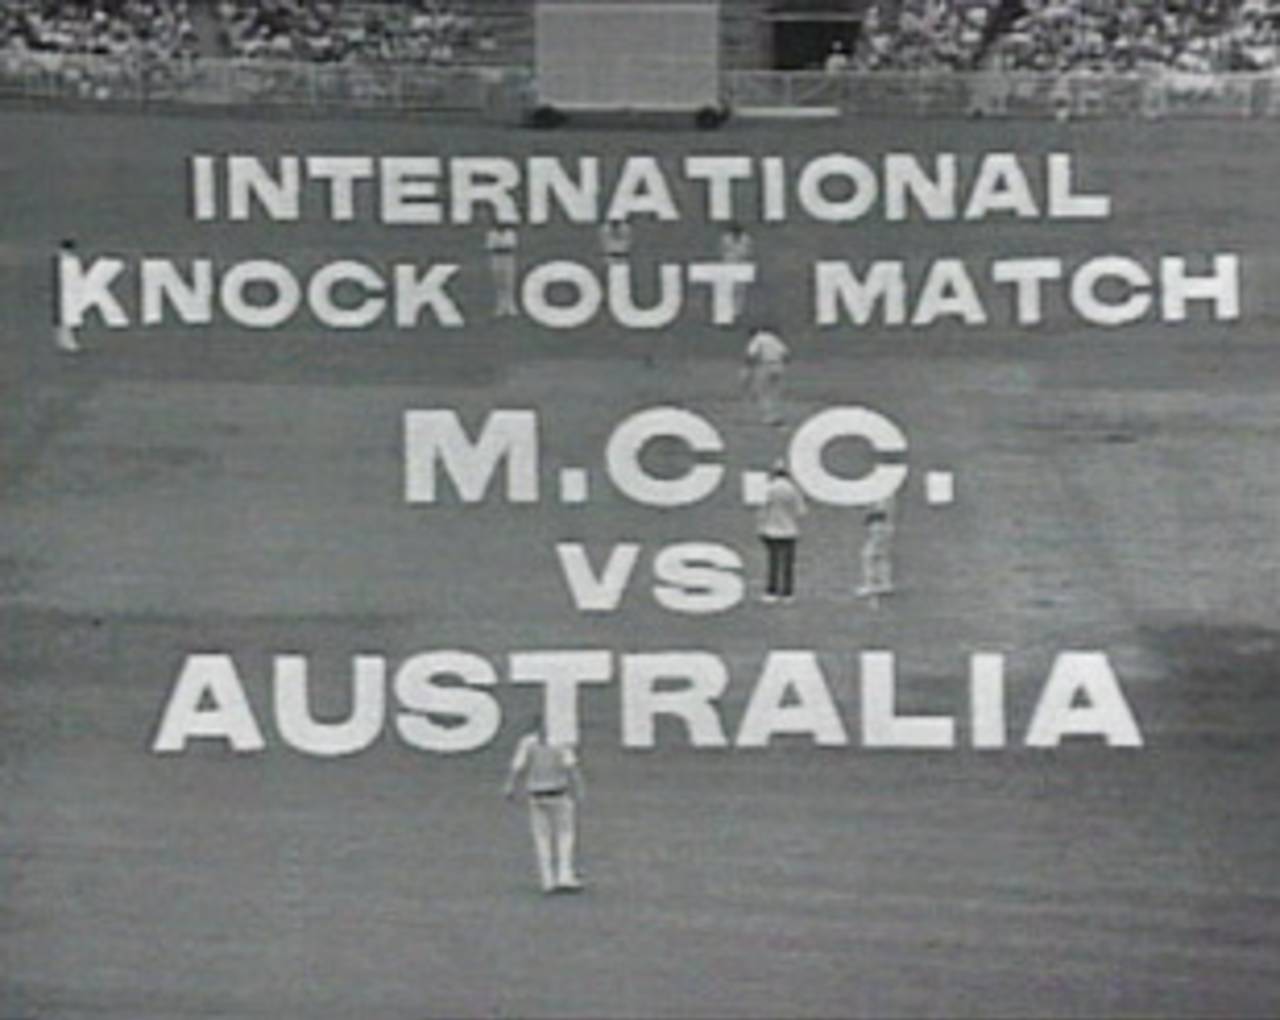 The first ODI, between Australia and England at the MCG, was originally meant to be a Test&nbsp;&nbsp;&bull;&nbsp;&nbsp;ESPNcricinfo Ltd